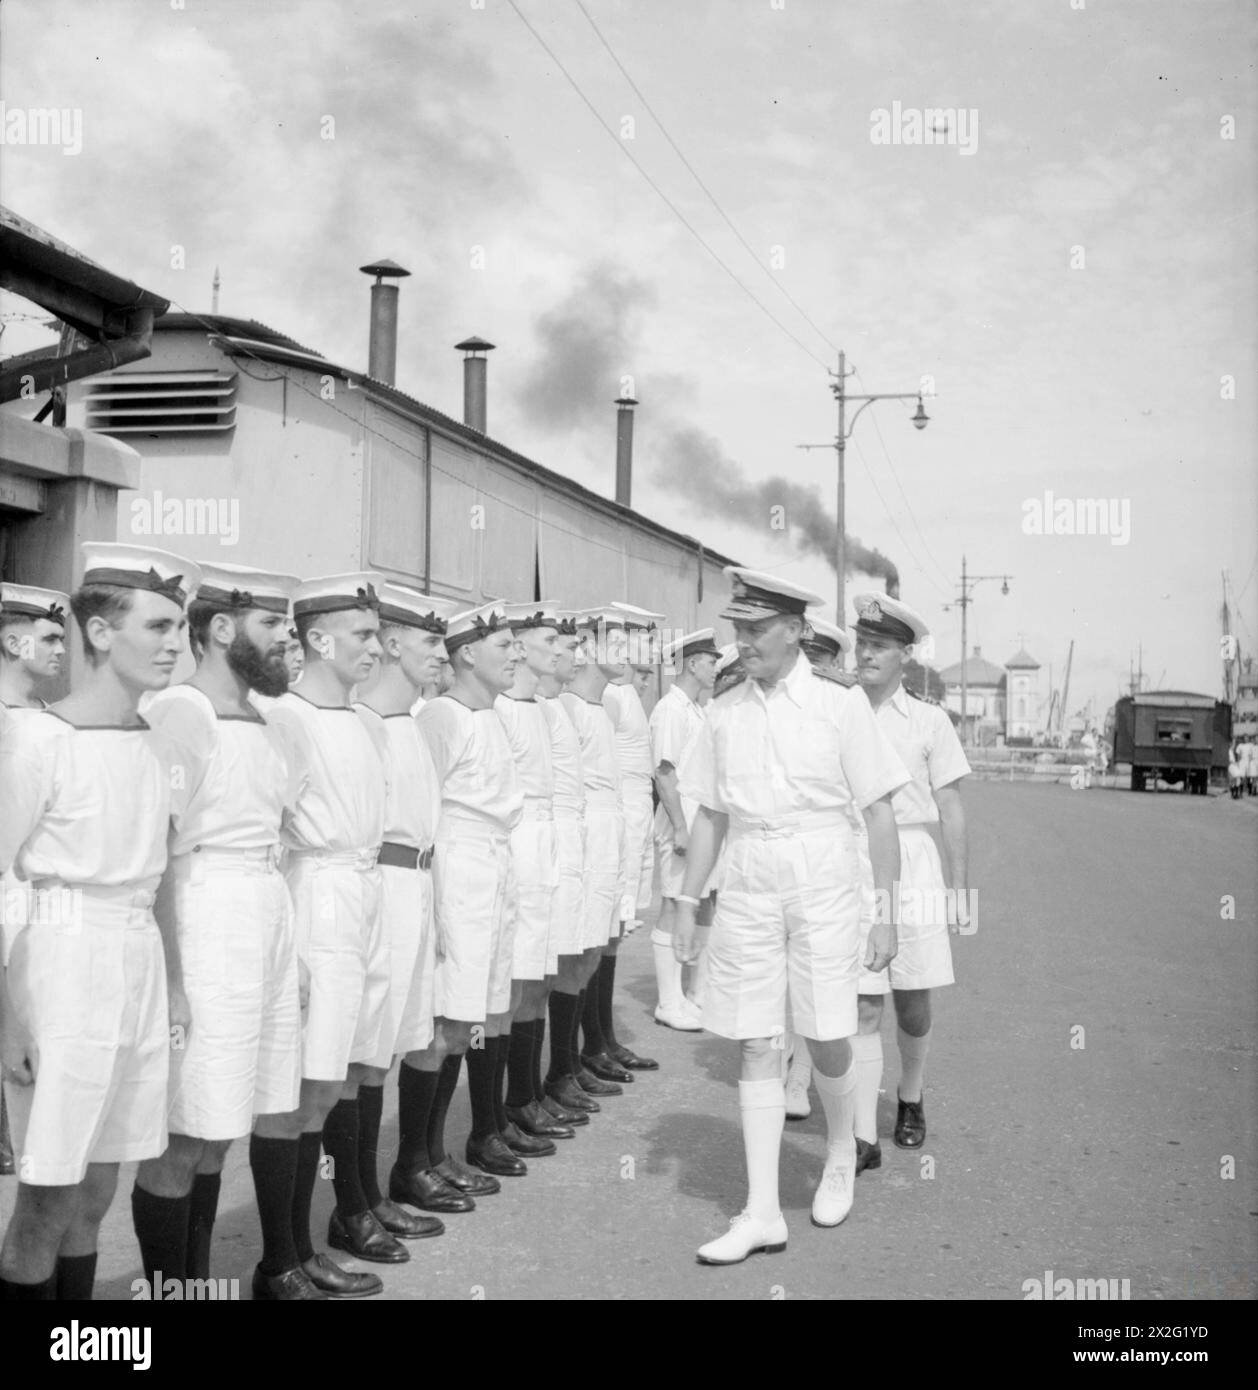 TALLY HO LIMPS HOME. 9 MARCH 1944, COLOMBO, CEYLON. THE RETURN TO PORT OF THE SUBMARINE TALLY HO AFTER A SUCCESSFUL PATROL DURING WHICH SHE SUSTAINED DAMAGE WHEN A JAPANESE TORPEDO BOAT CRASHED INTO HER. - C in C Eastern Fleet, Admiral Sir James Somerville, KCB, KBE, DSO, inspects members of the TALLY HO's crew. Left to right ERA J M Powell, DSM, of Penarth; AB Kenneth Lockyer, of Brixton; L/Sea Albert Sutton, of Birmingham; L/Stoker W E Betts, of Putney; AB D A Harvey, of Blythe; L/Sea S Hawkey, DSM, of Liverpool; Stoker W Illsley, of Waterloo, London; L/Stoker G French, of Bexley Heath; AB C Stock Photo